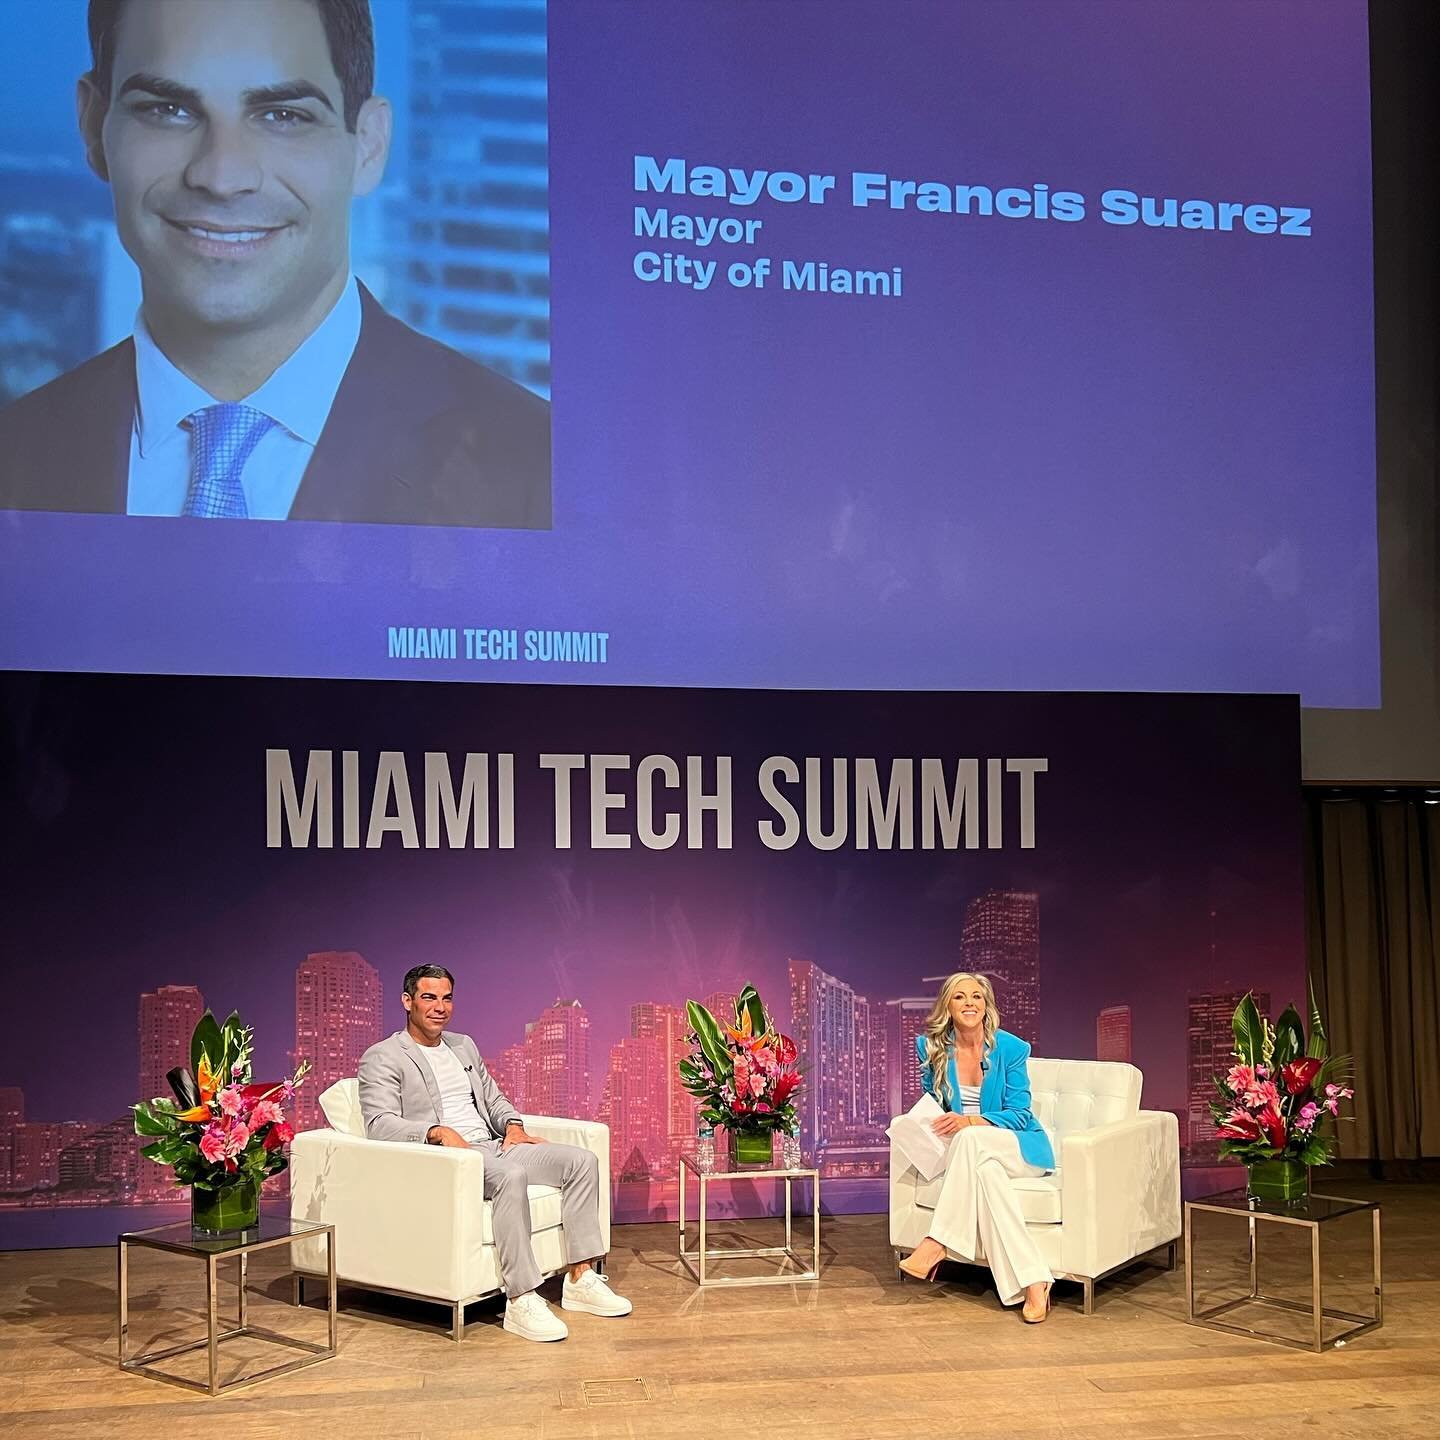 Thank you to everyone who helped make our 3rd annual @miamitechsummit such an incredible success. This team is truly the best - @josefelixdiaz , @justinsayfie305 , @caroleannhausman, @mcmanusreport1 , @bygoldmeier and our @mainandrose team.

I had th